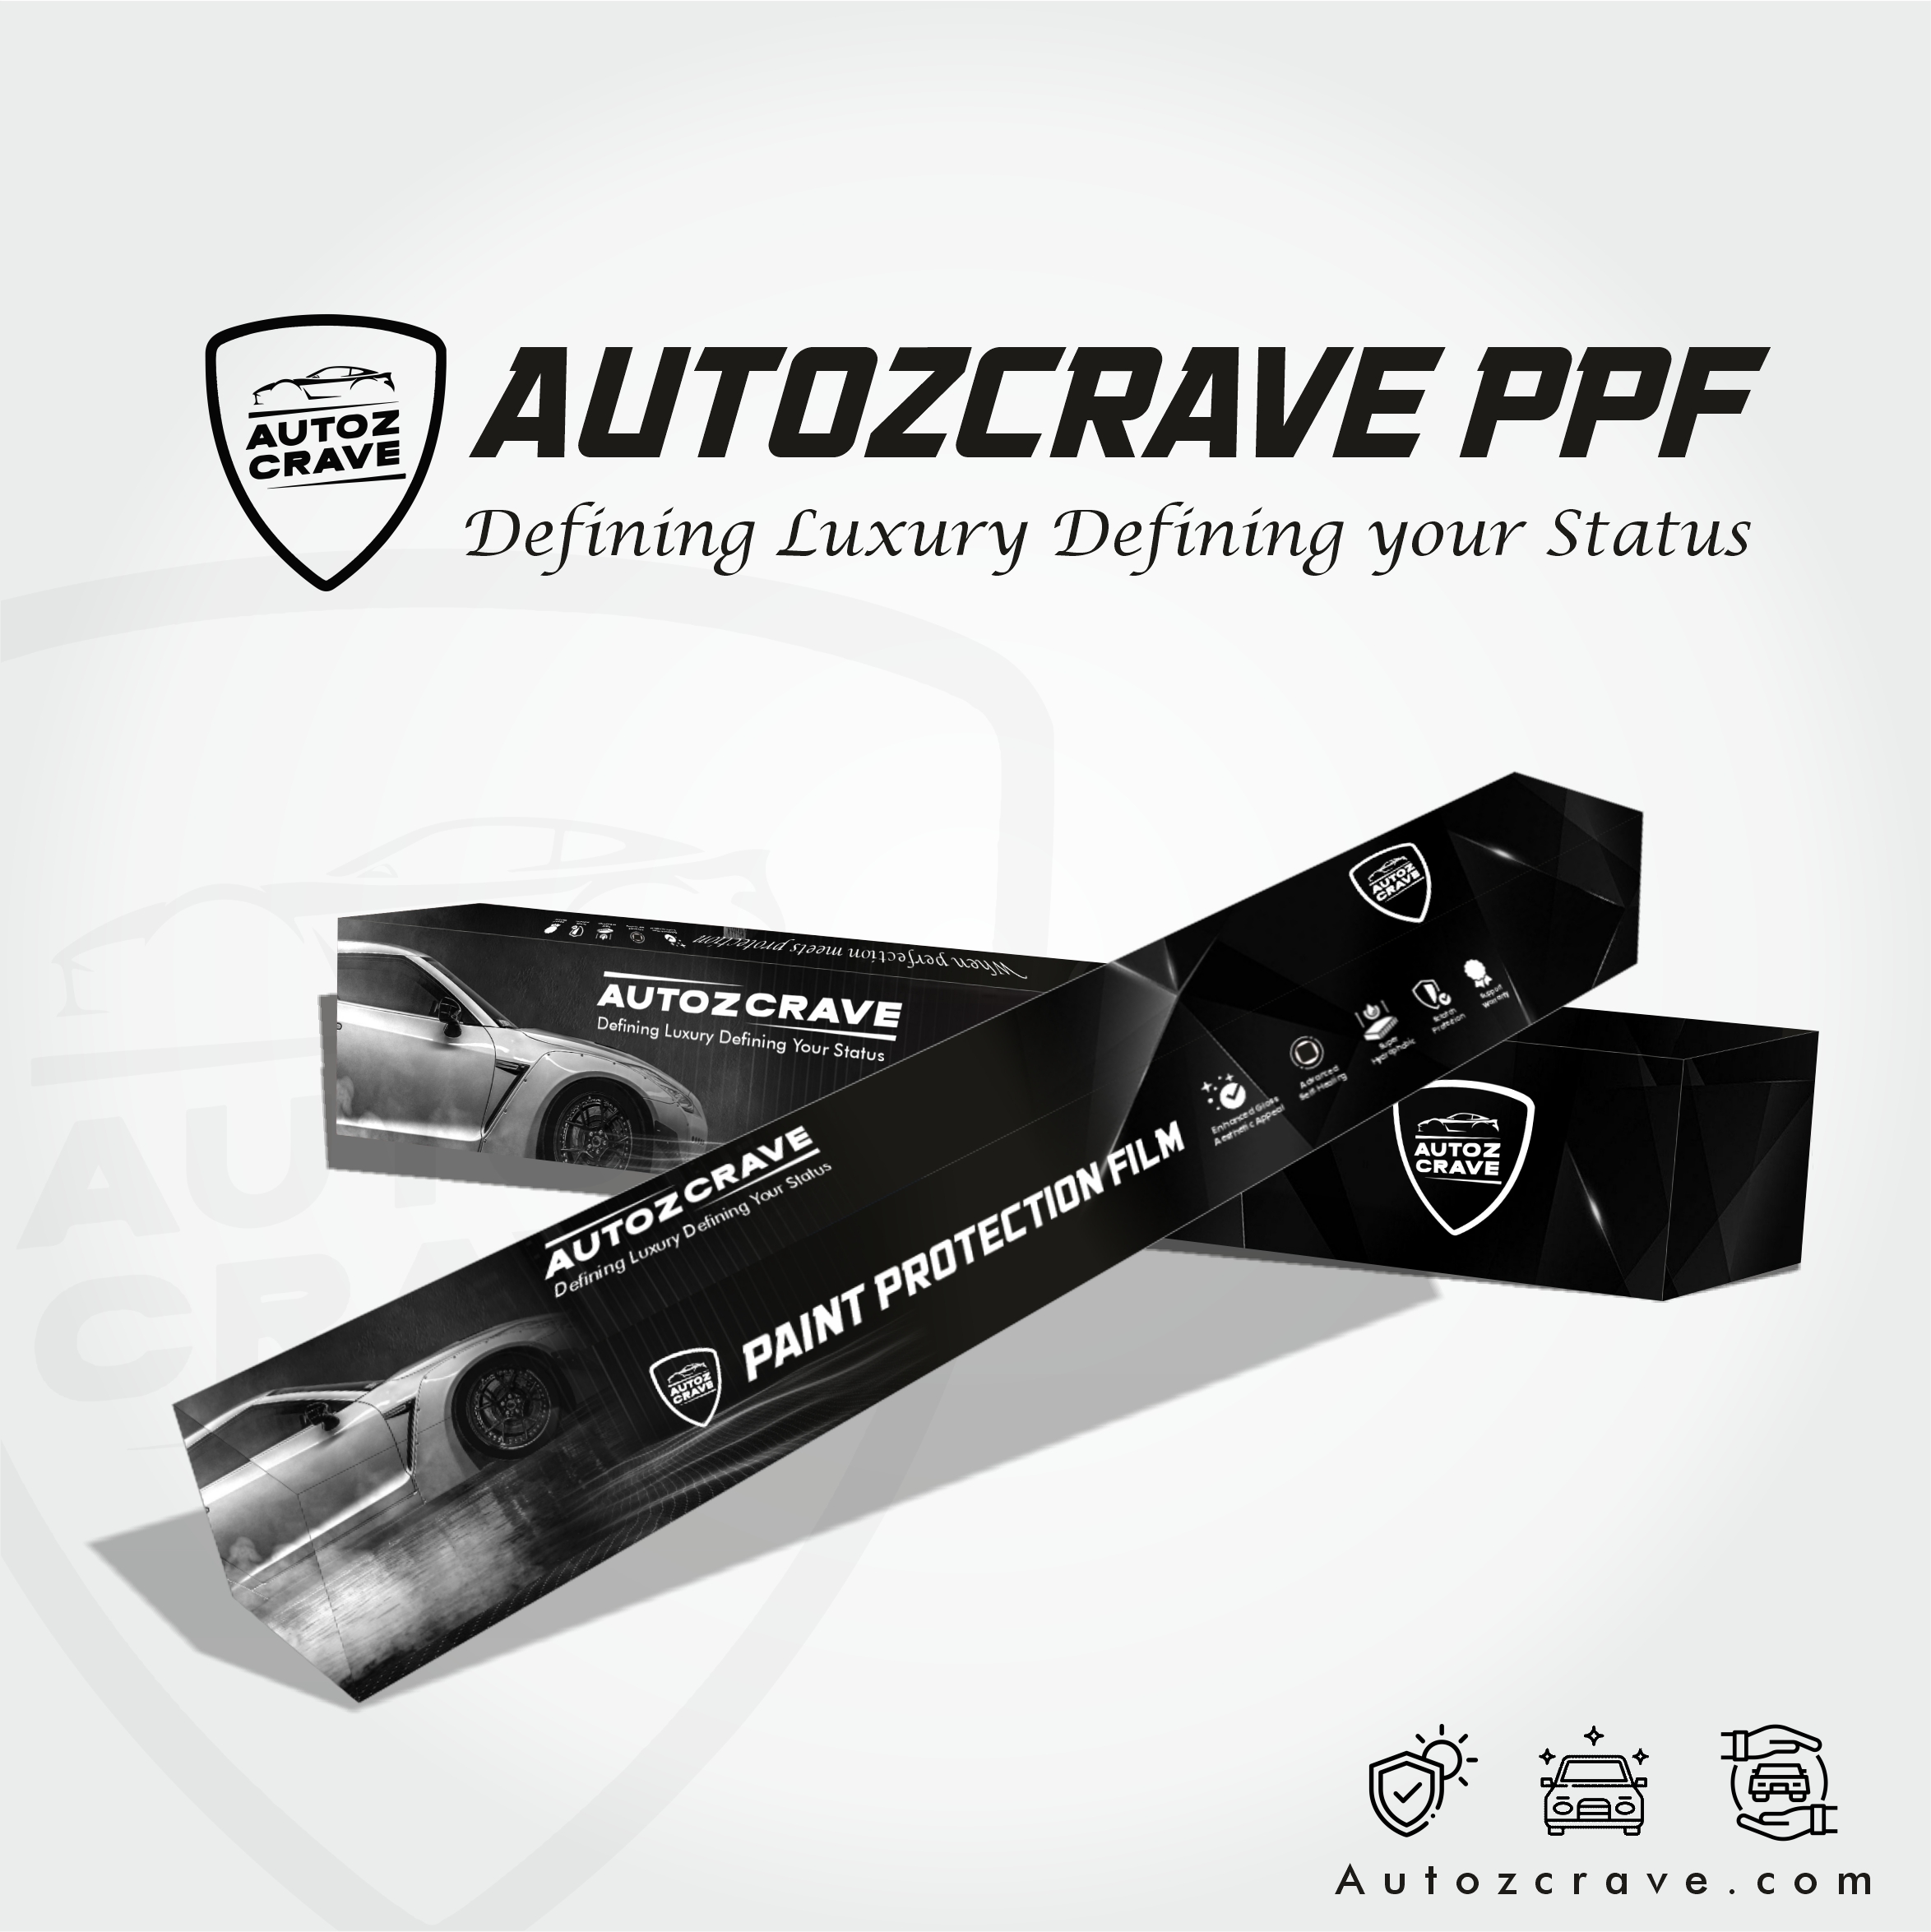 PAINT PROTECTION FILM BY AUTOZCRAVE PPF INSTANT SELF-HEALING (I-200)